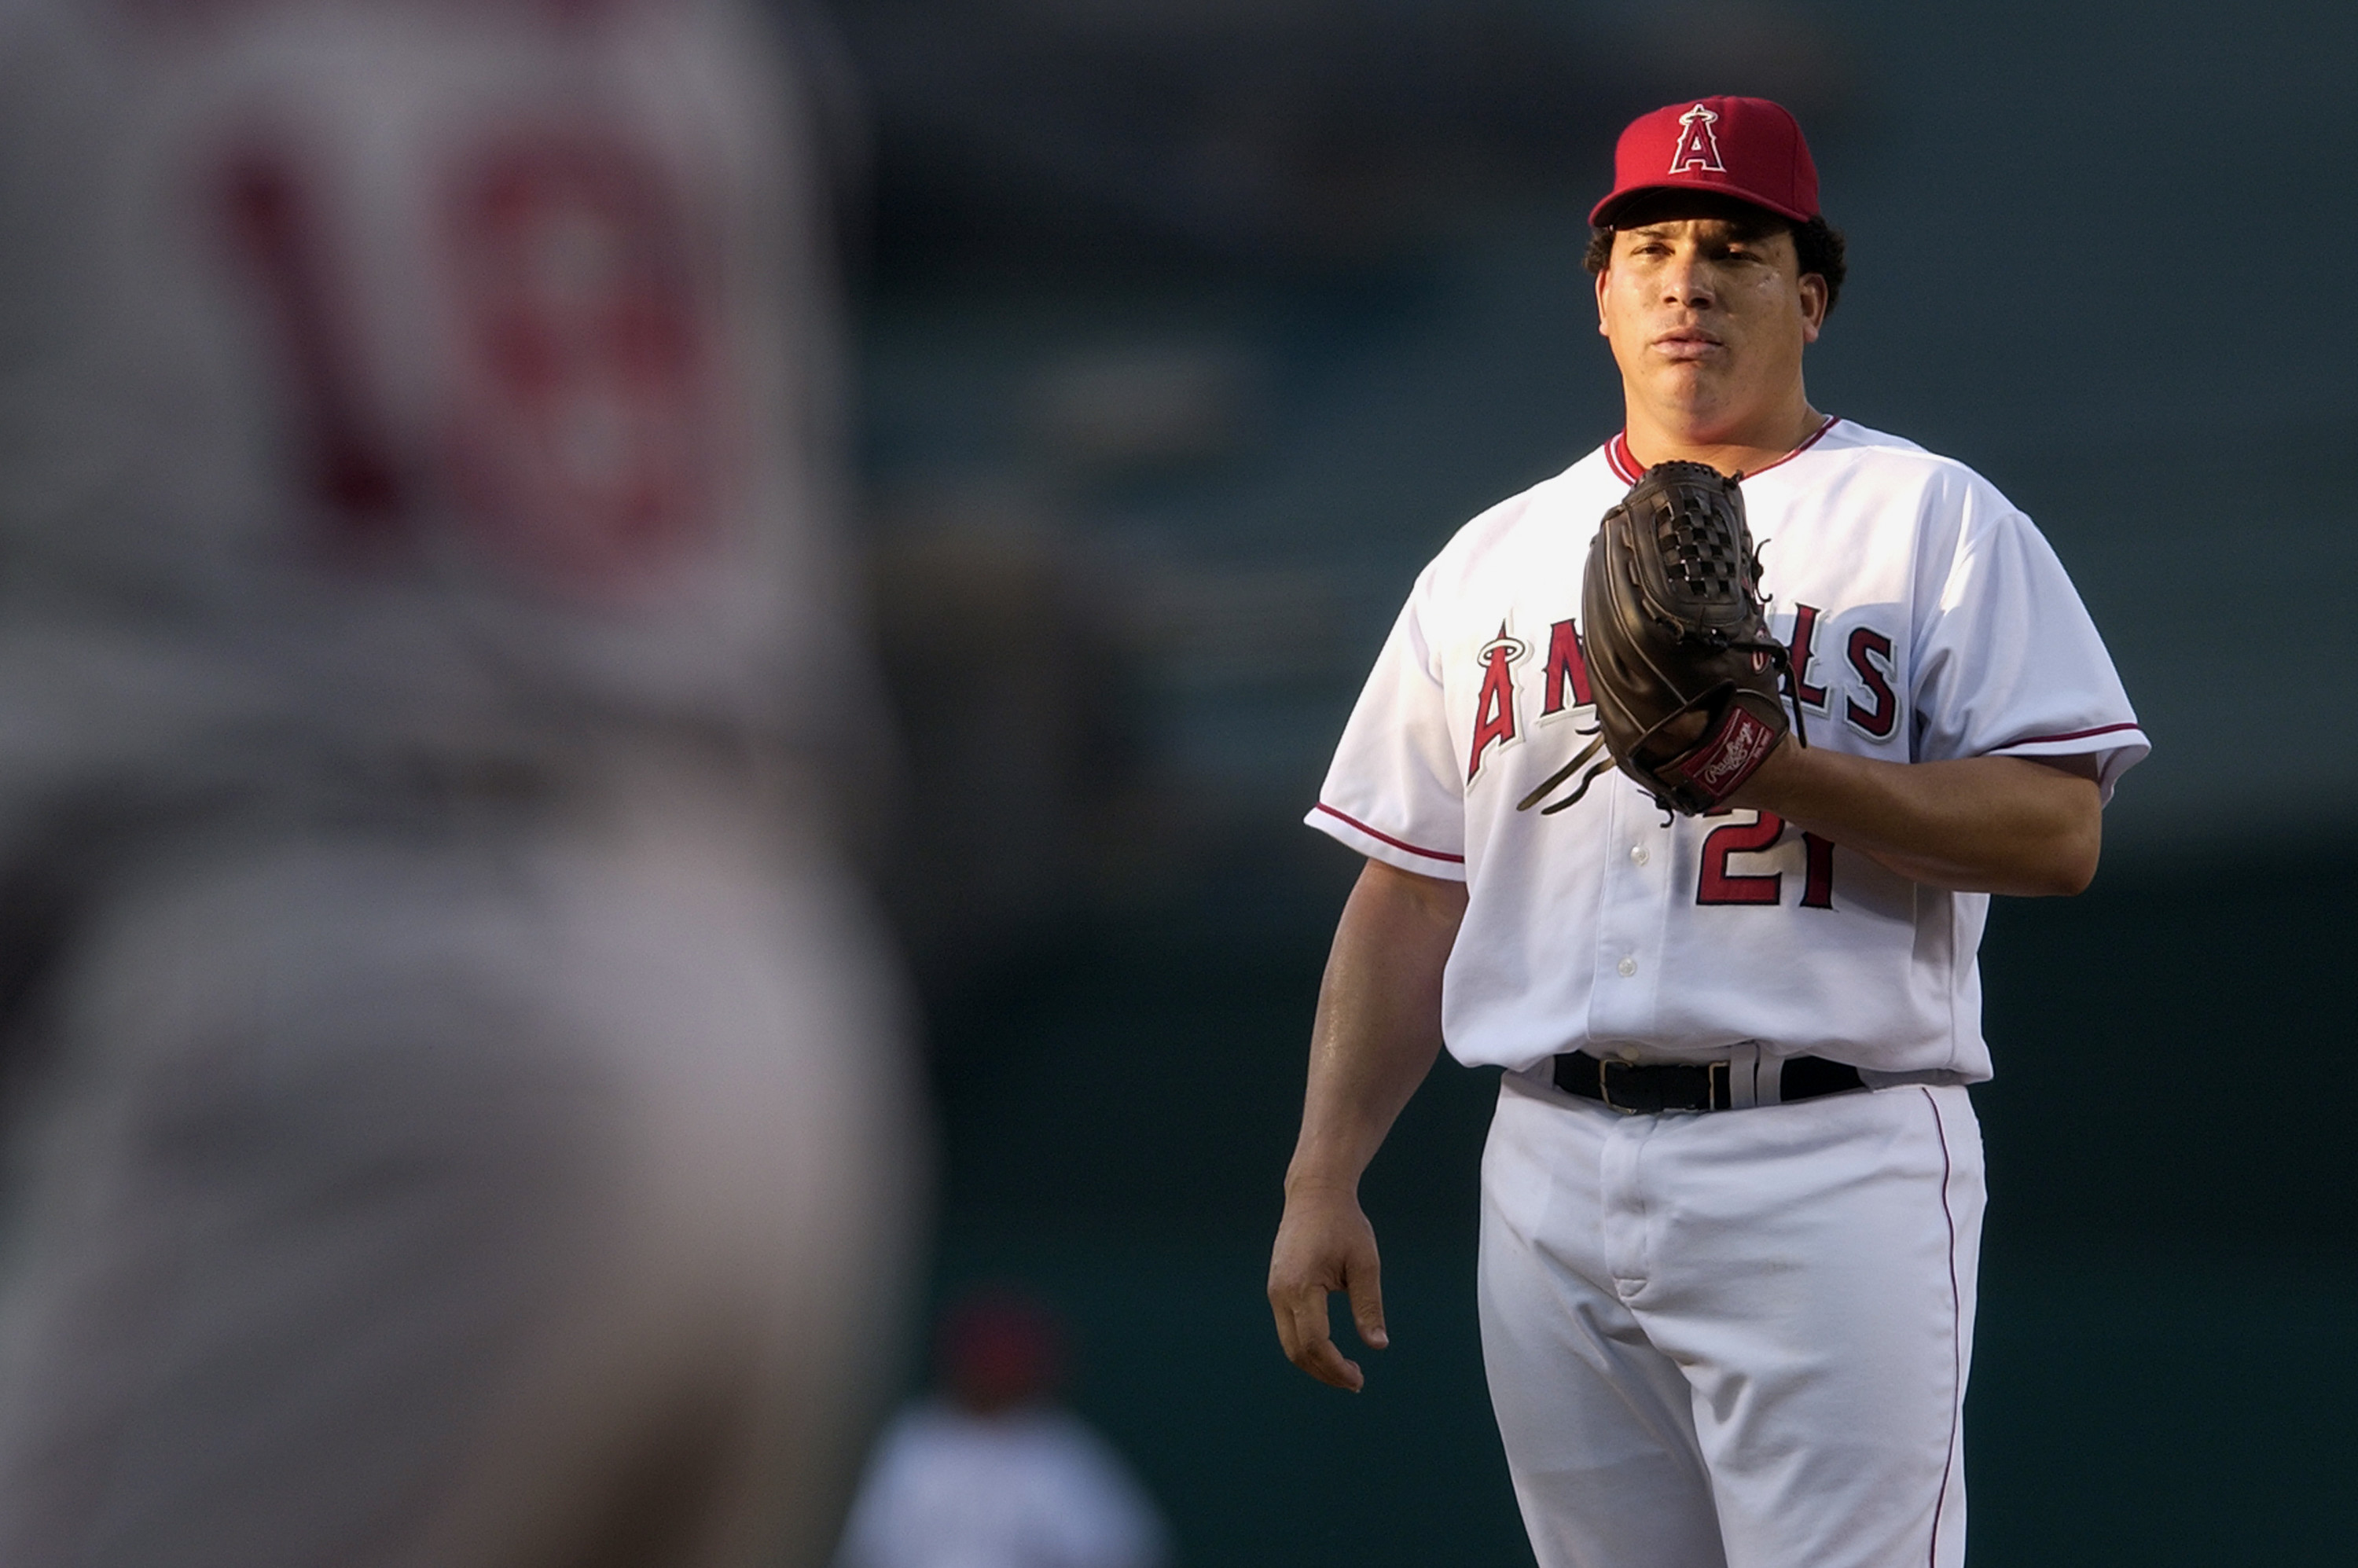 Watching Bartolo Colon run the bases will brighten up your day